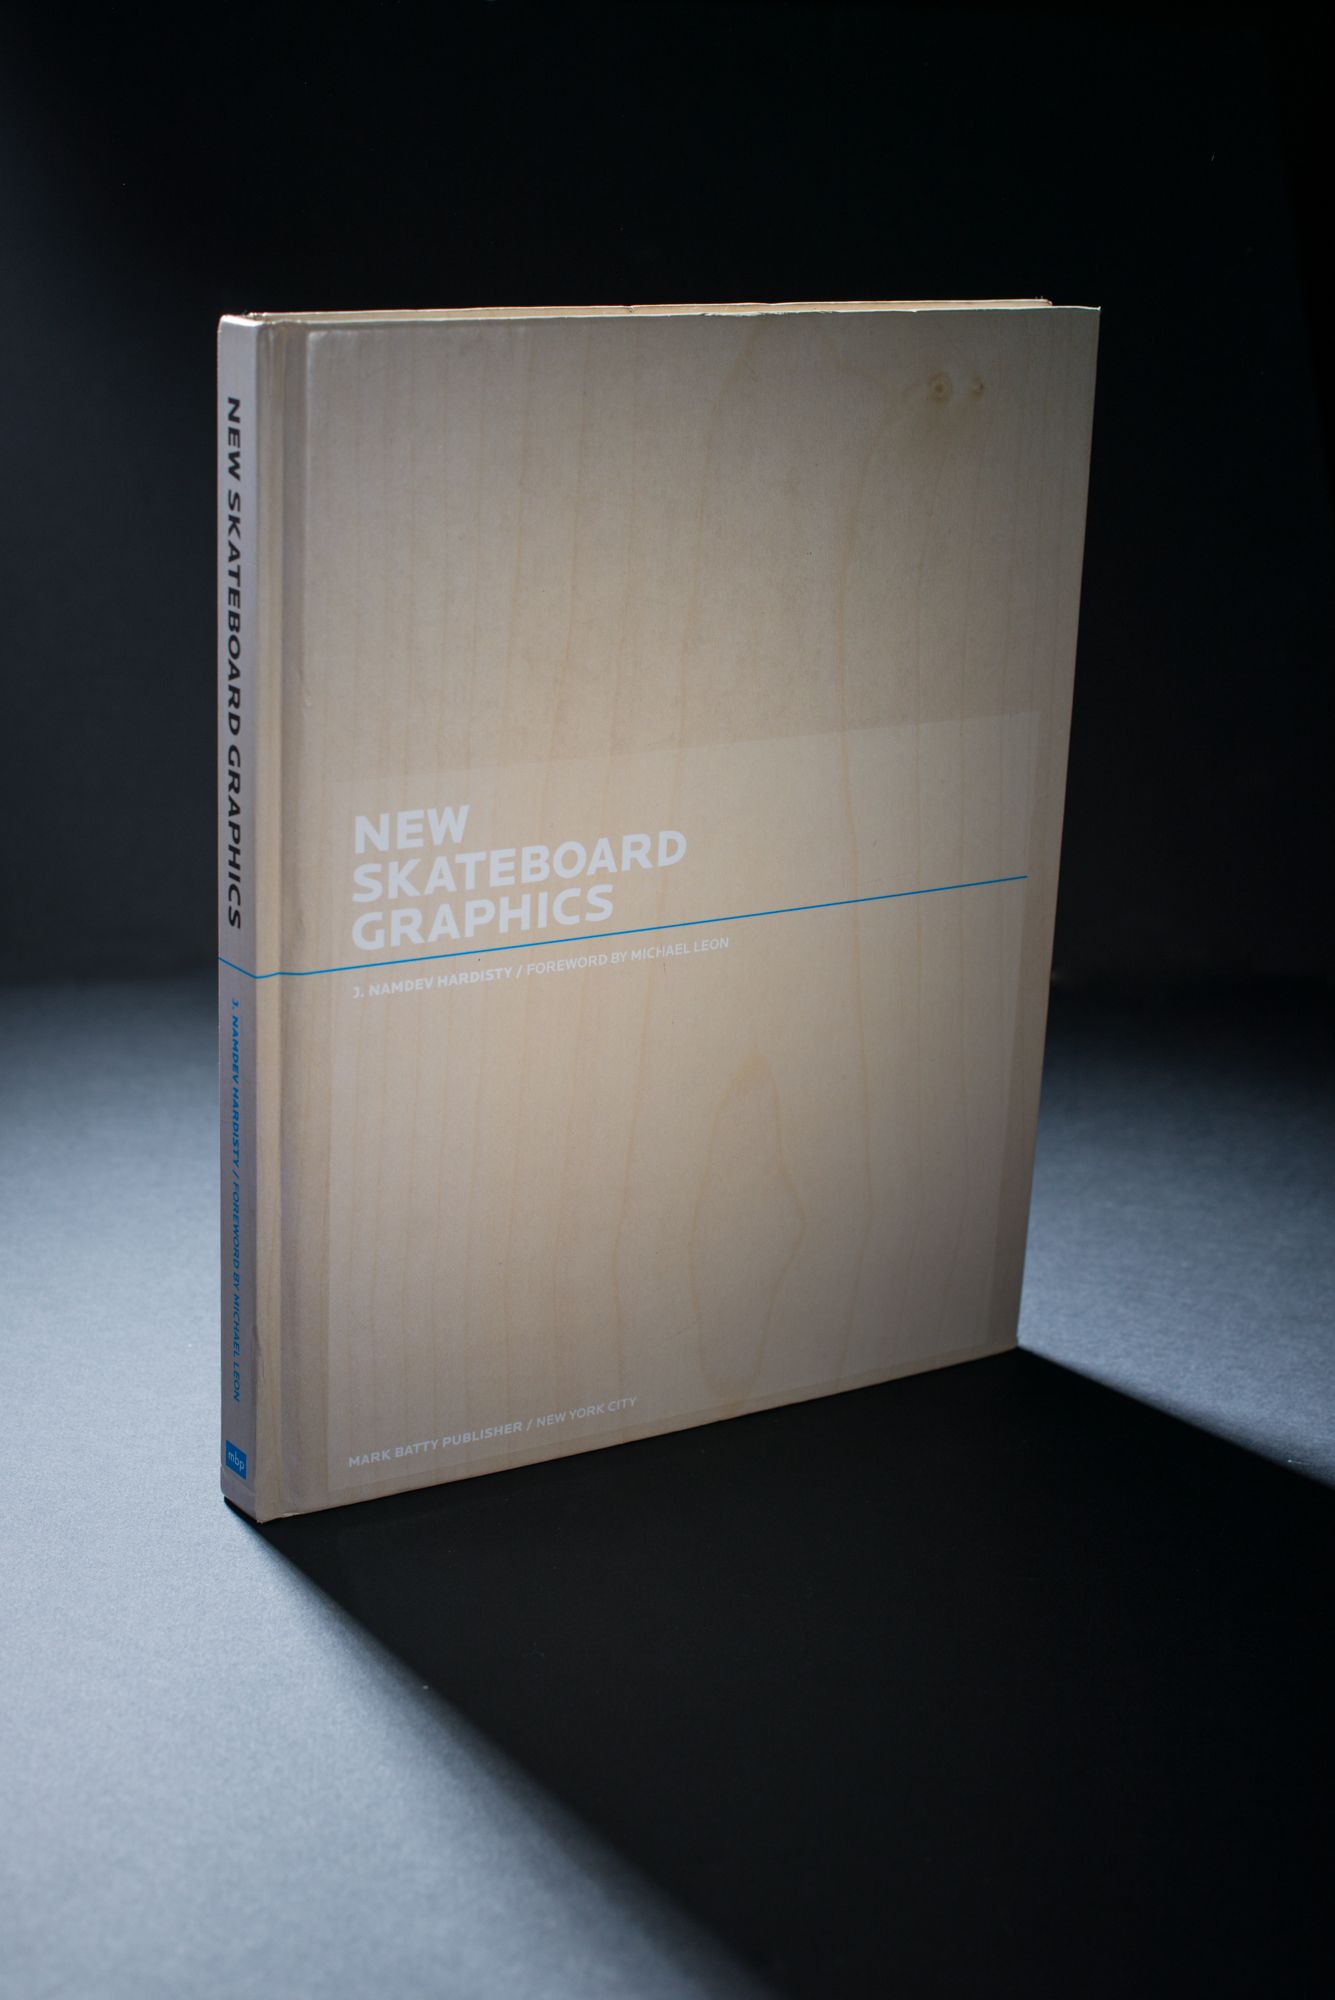 New Skateboards Graphics book